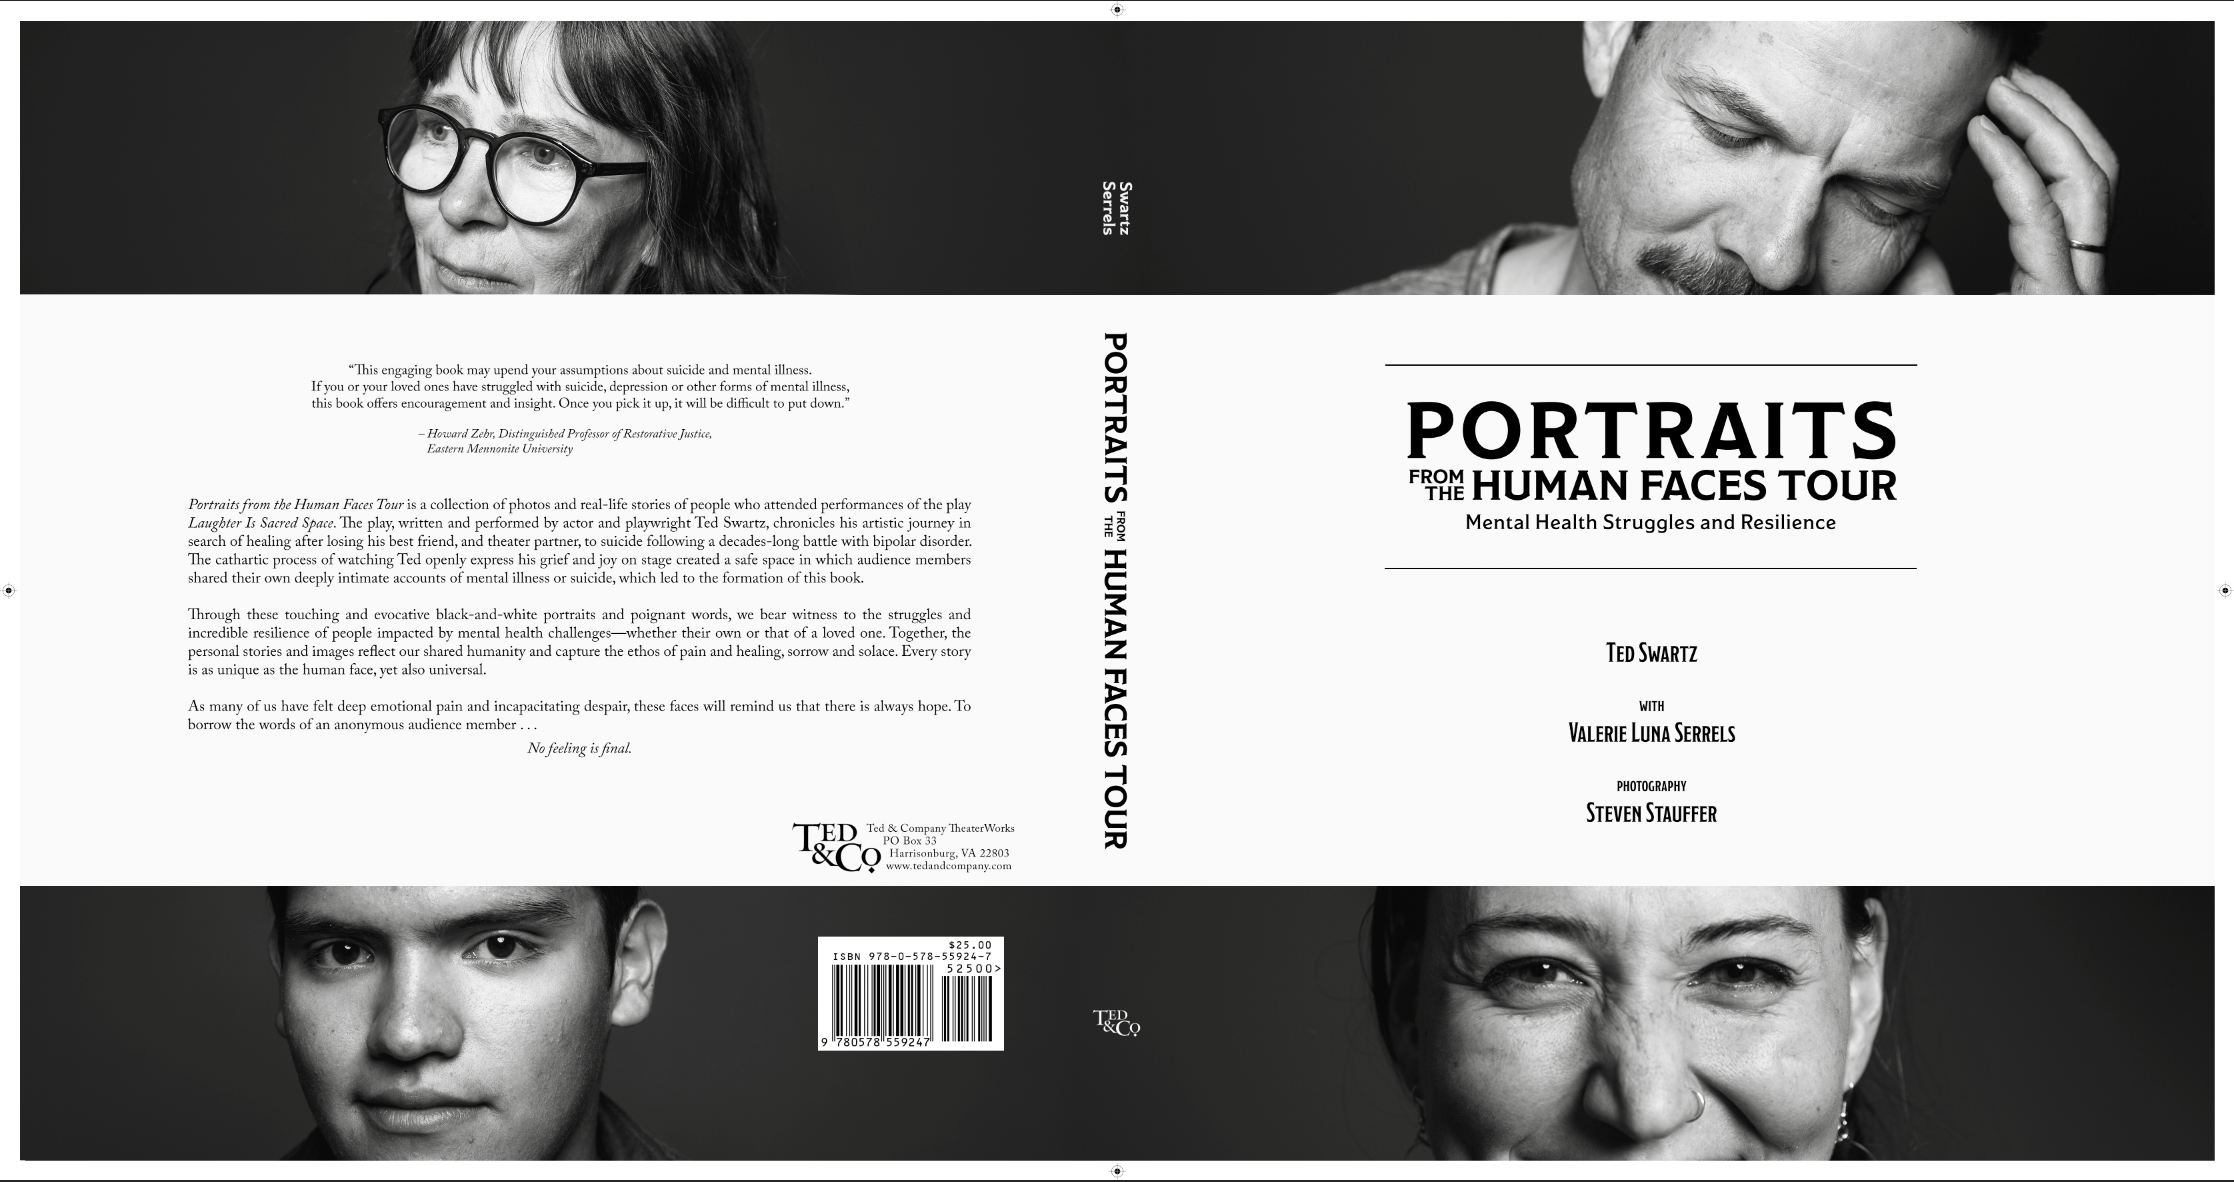 Portraits from Human Faces Tour book cover